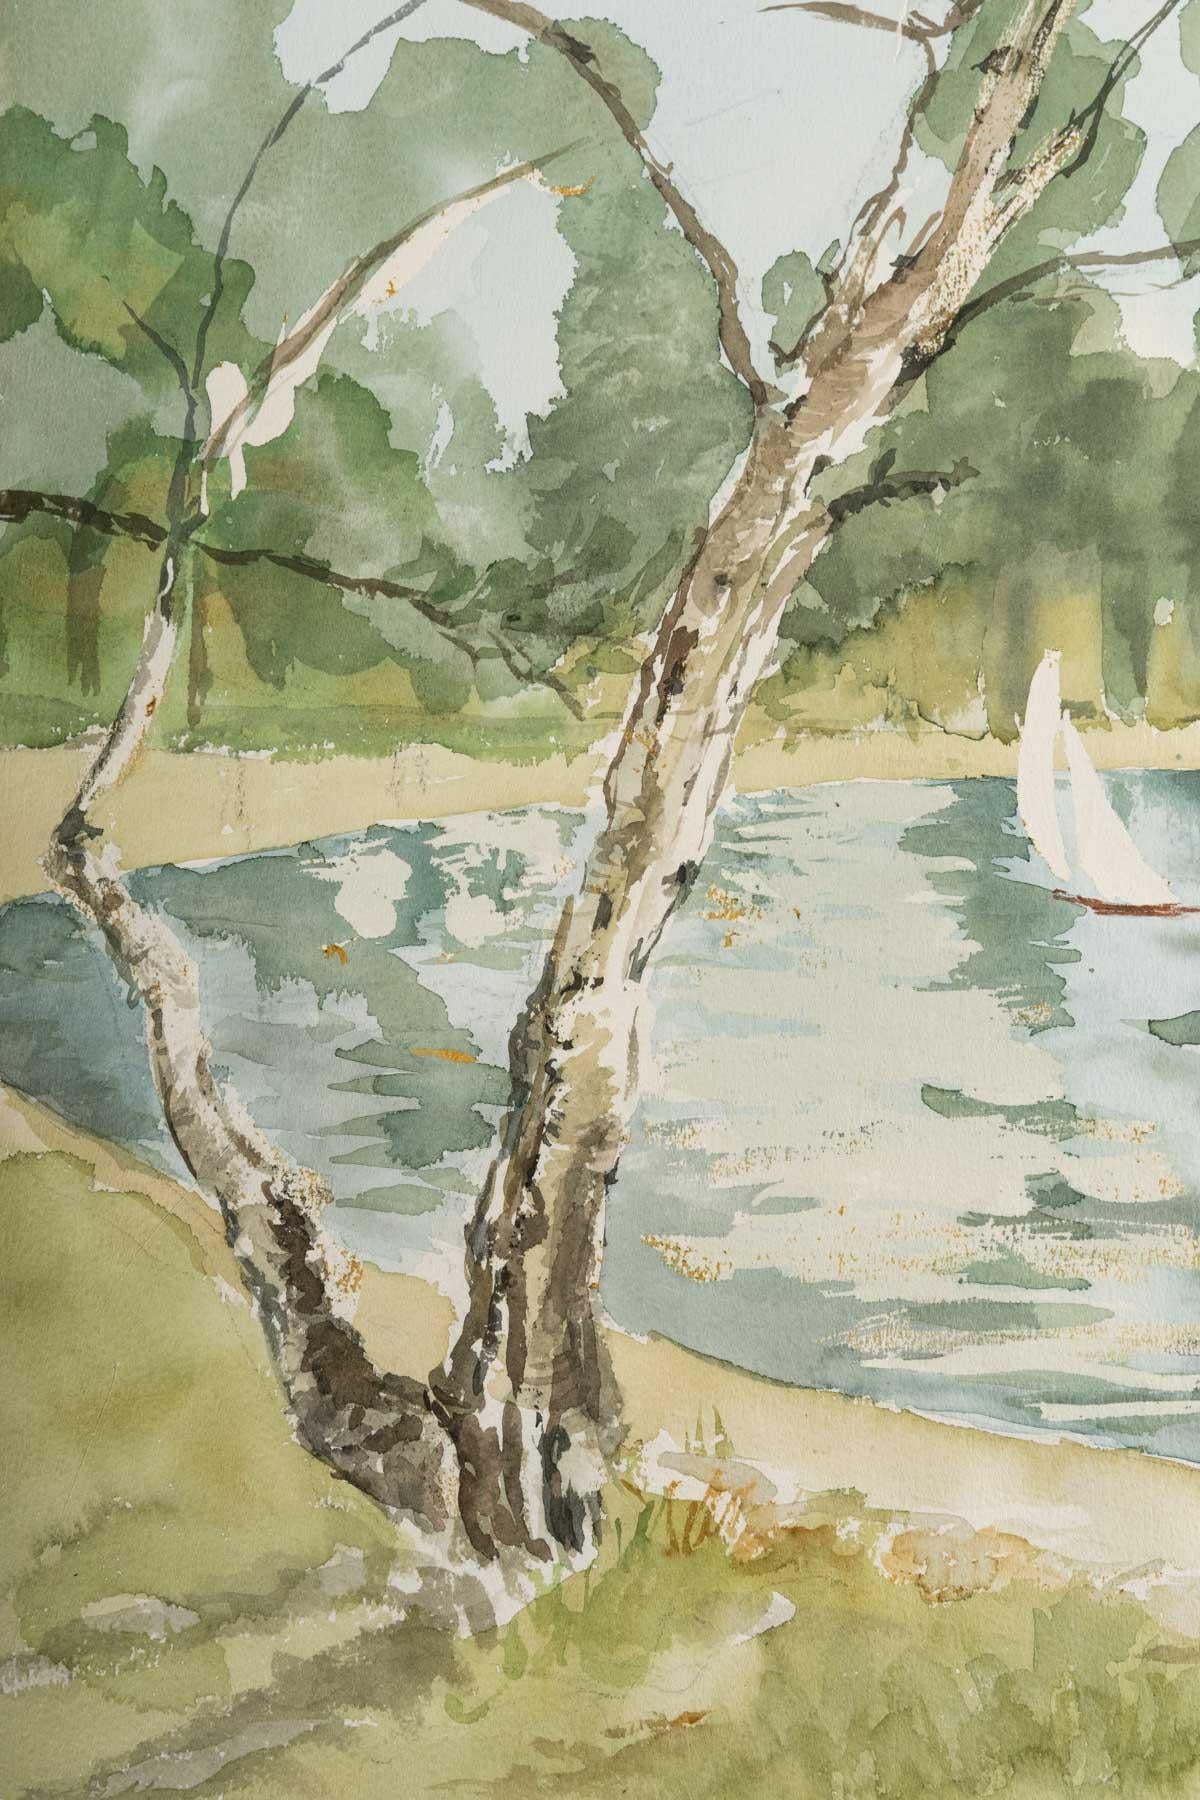 Painting on paper, lakeside with boats, Luez, 1990
Measures: H: 46 cm, W: 61 cm, D: 0.1 cm.